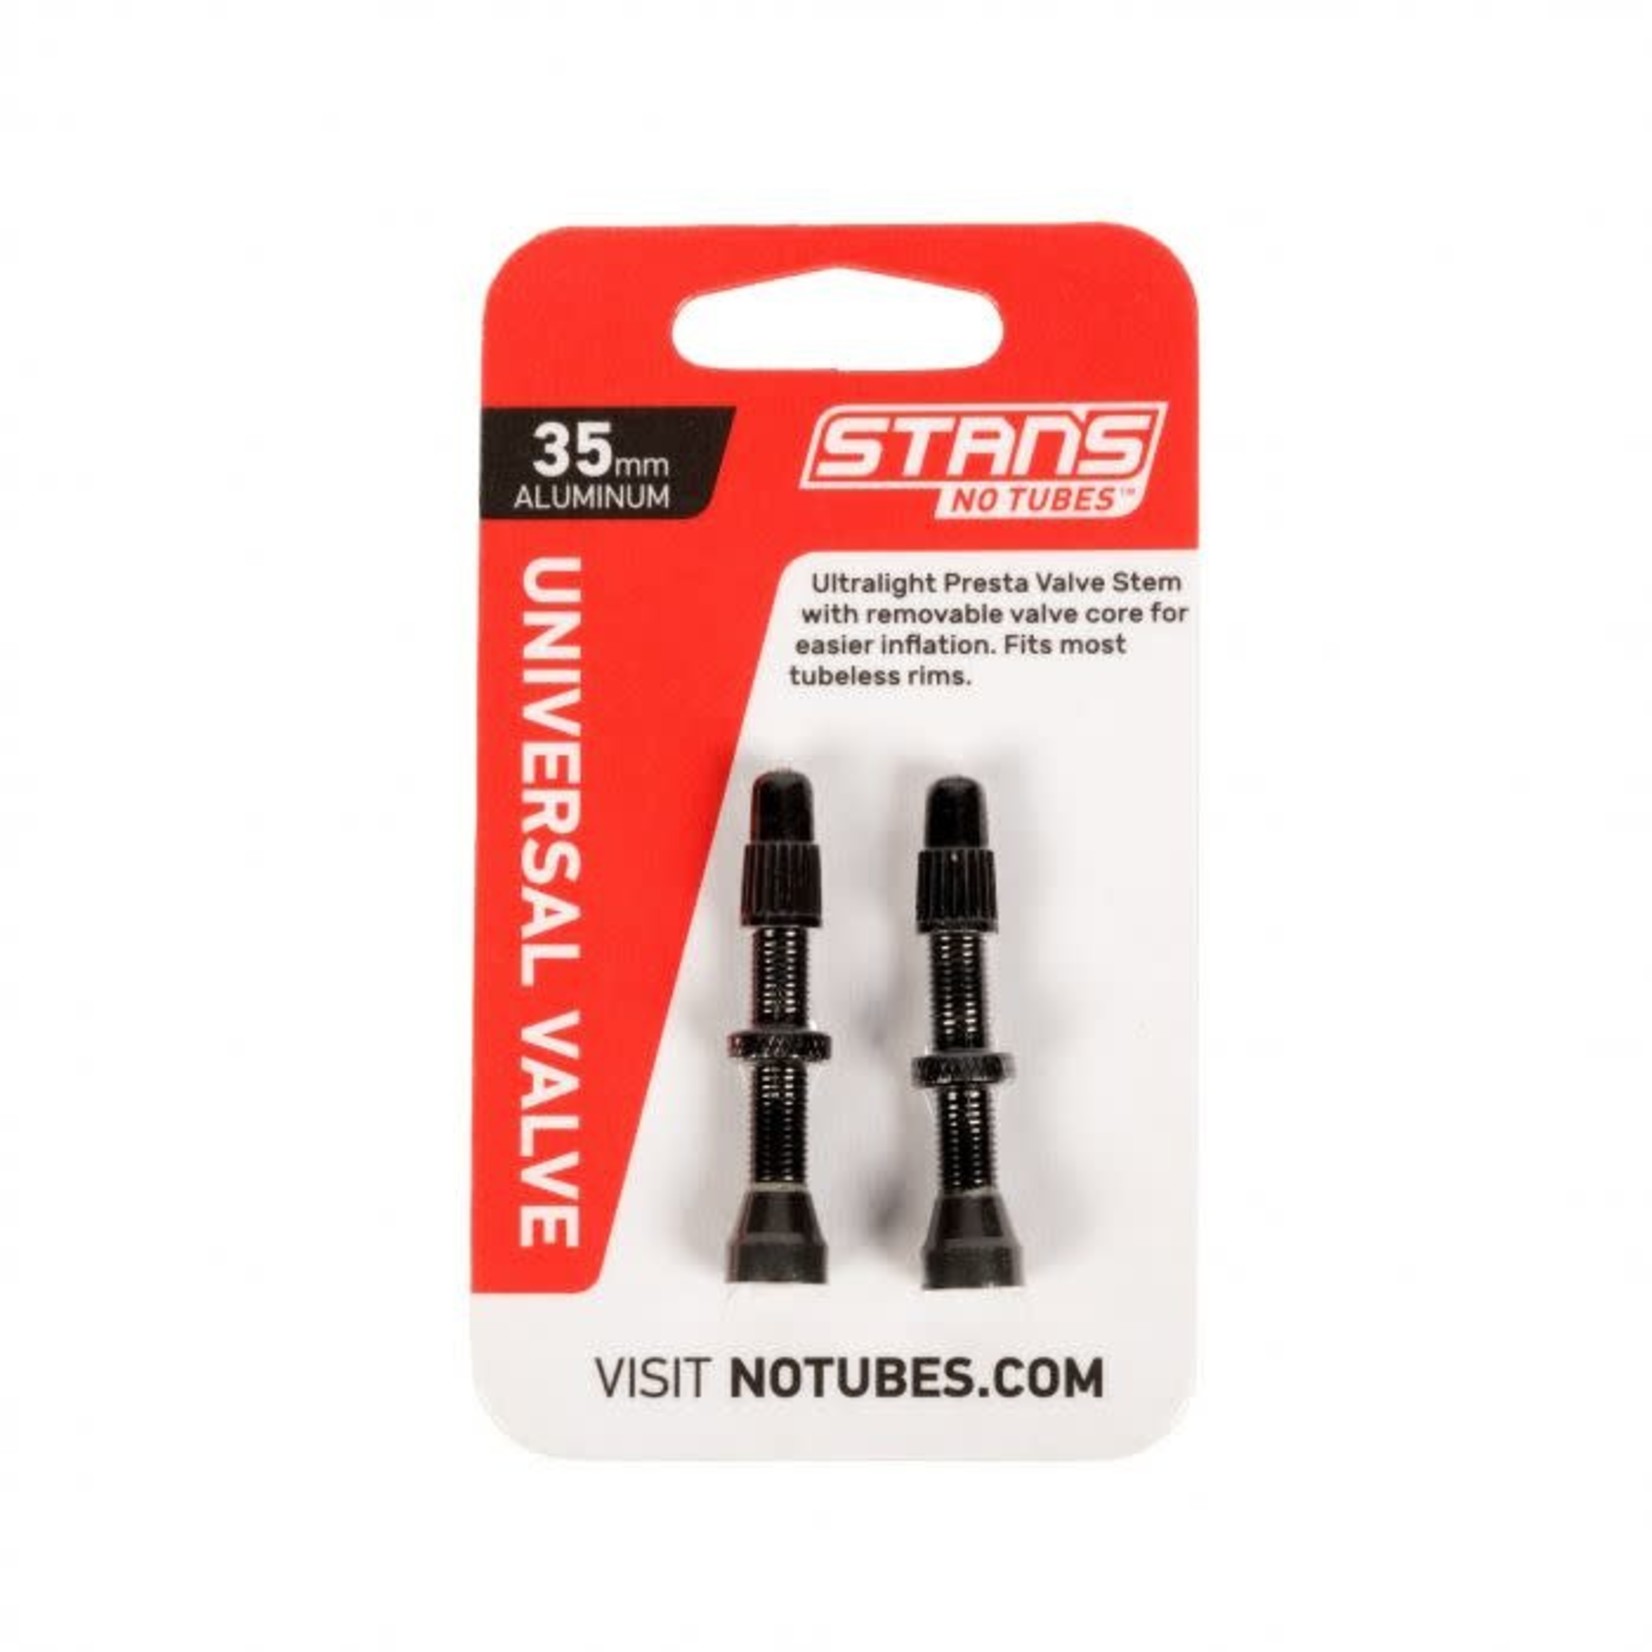 Stans No Tubes STAN'S, Tubeless Valves, Alu, Pair assorted lengths